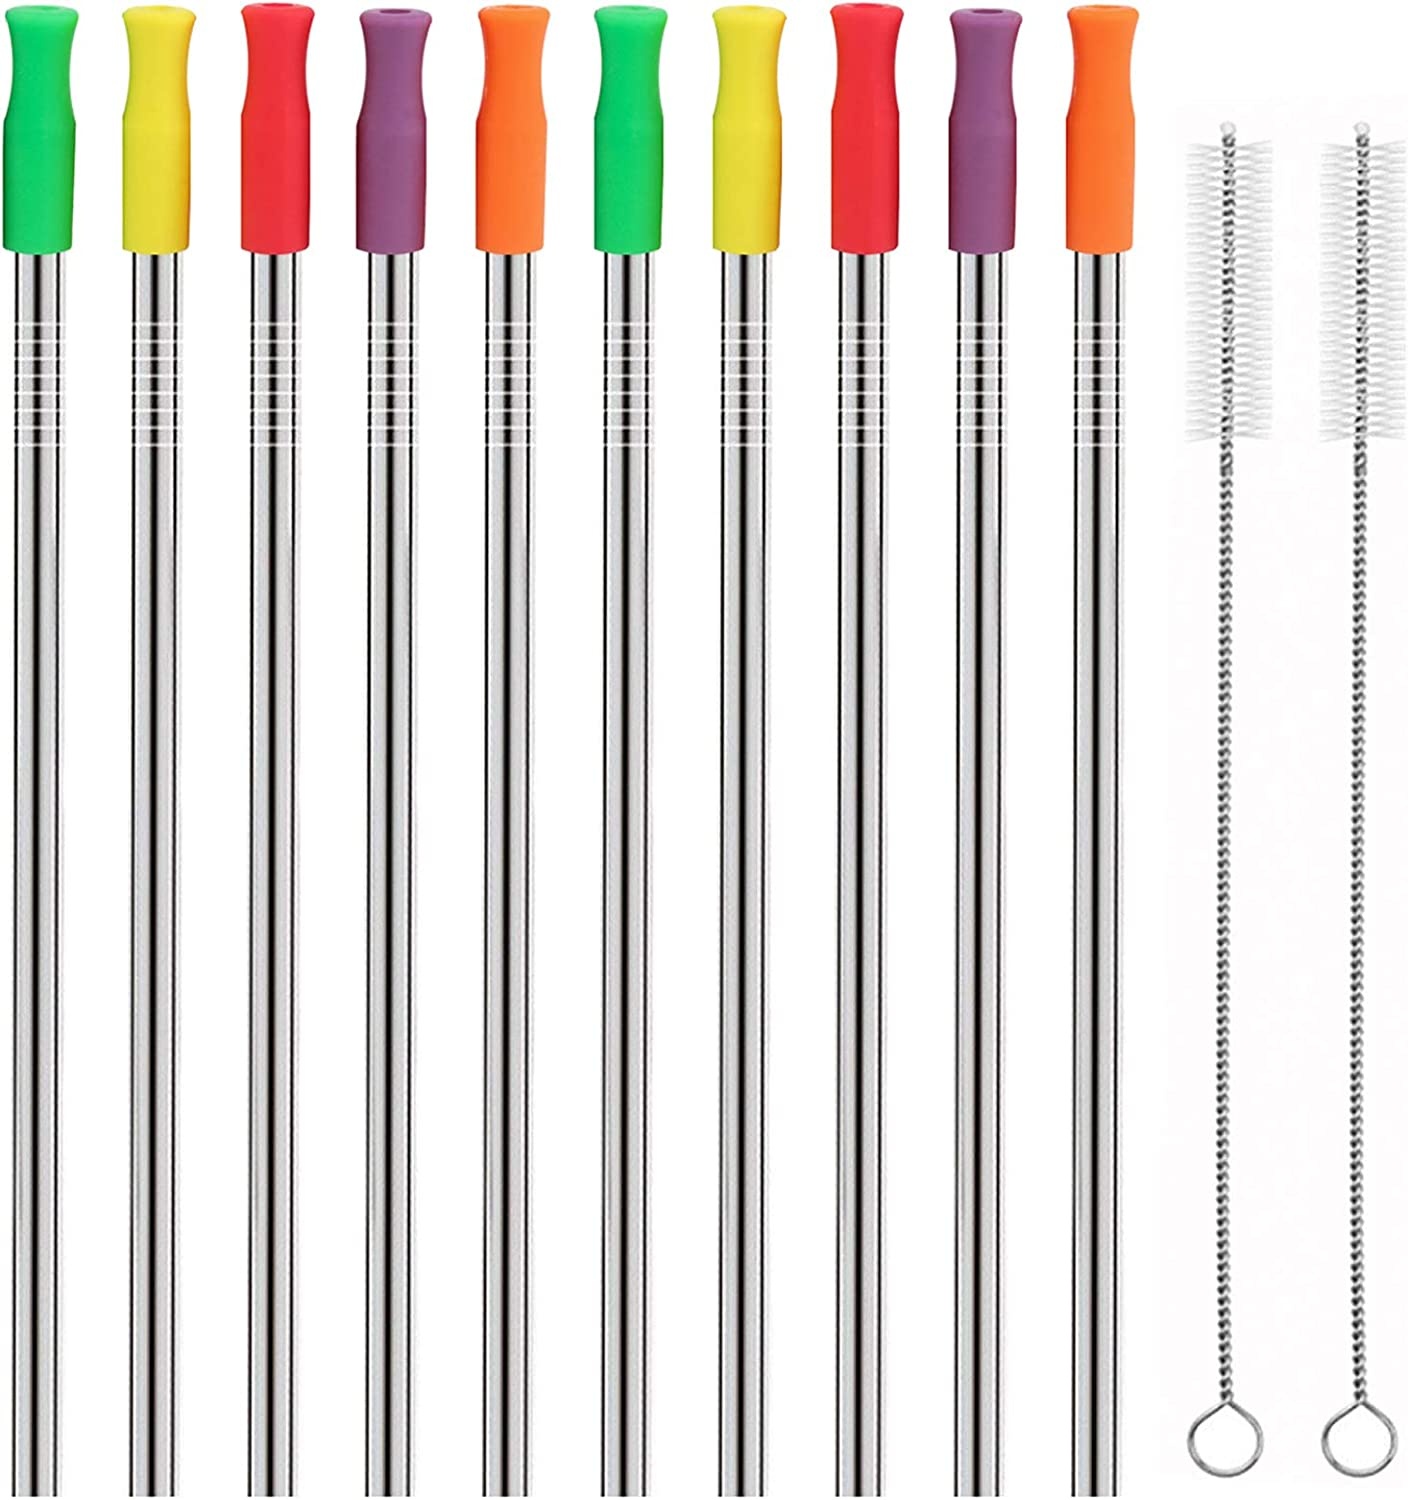 https://cdn.shoplightspeed.com/shops/645728/files/54864565/stainless-steel-straw-with-silicone-tip-105.jpg